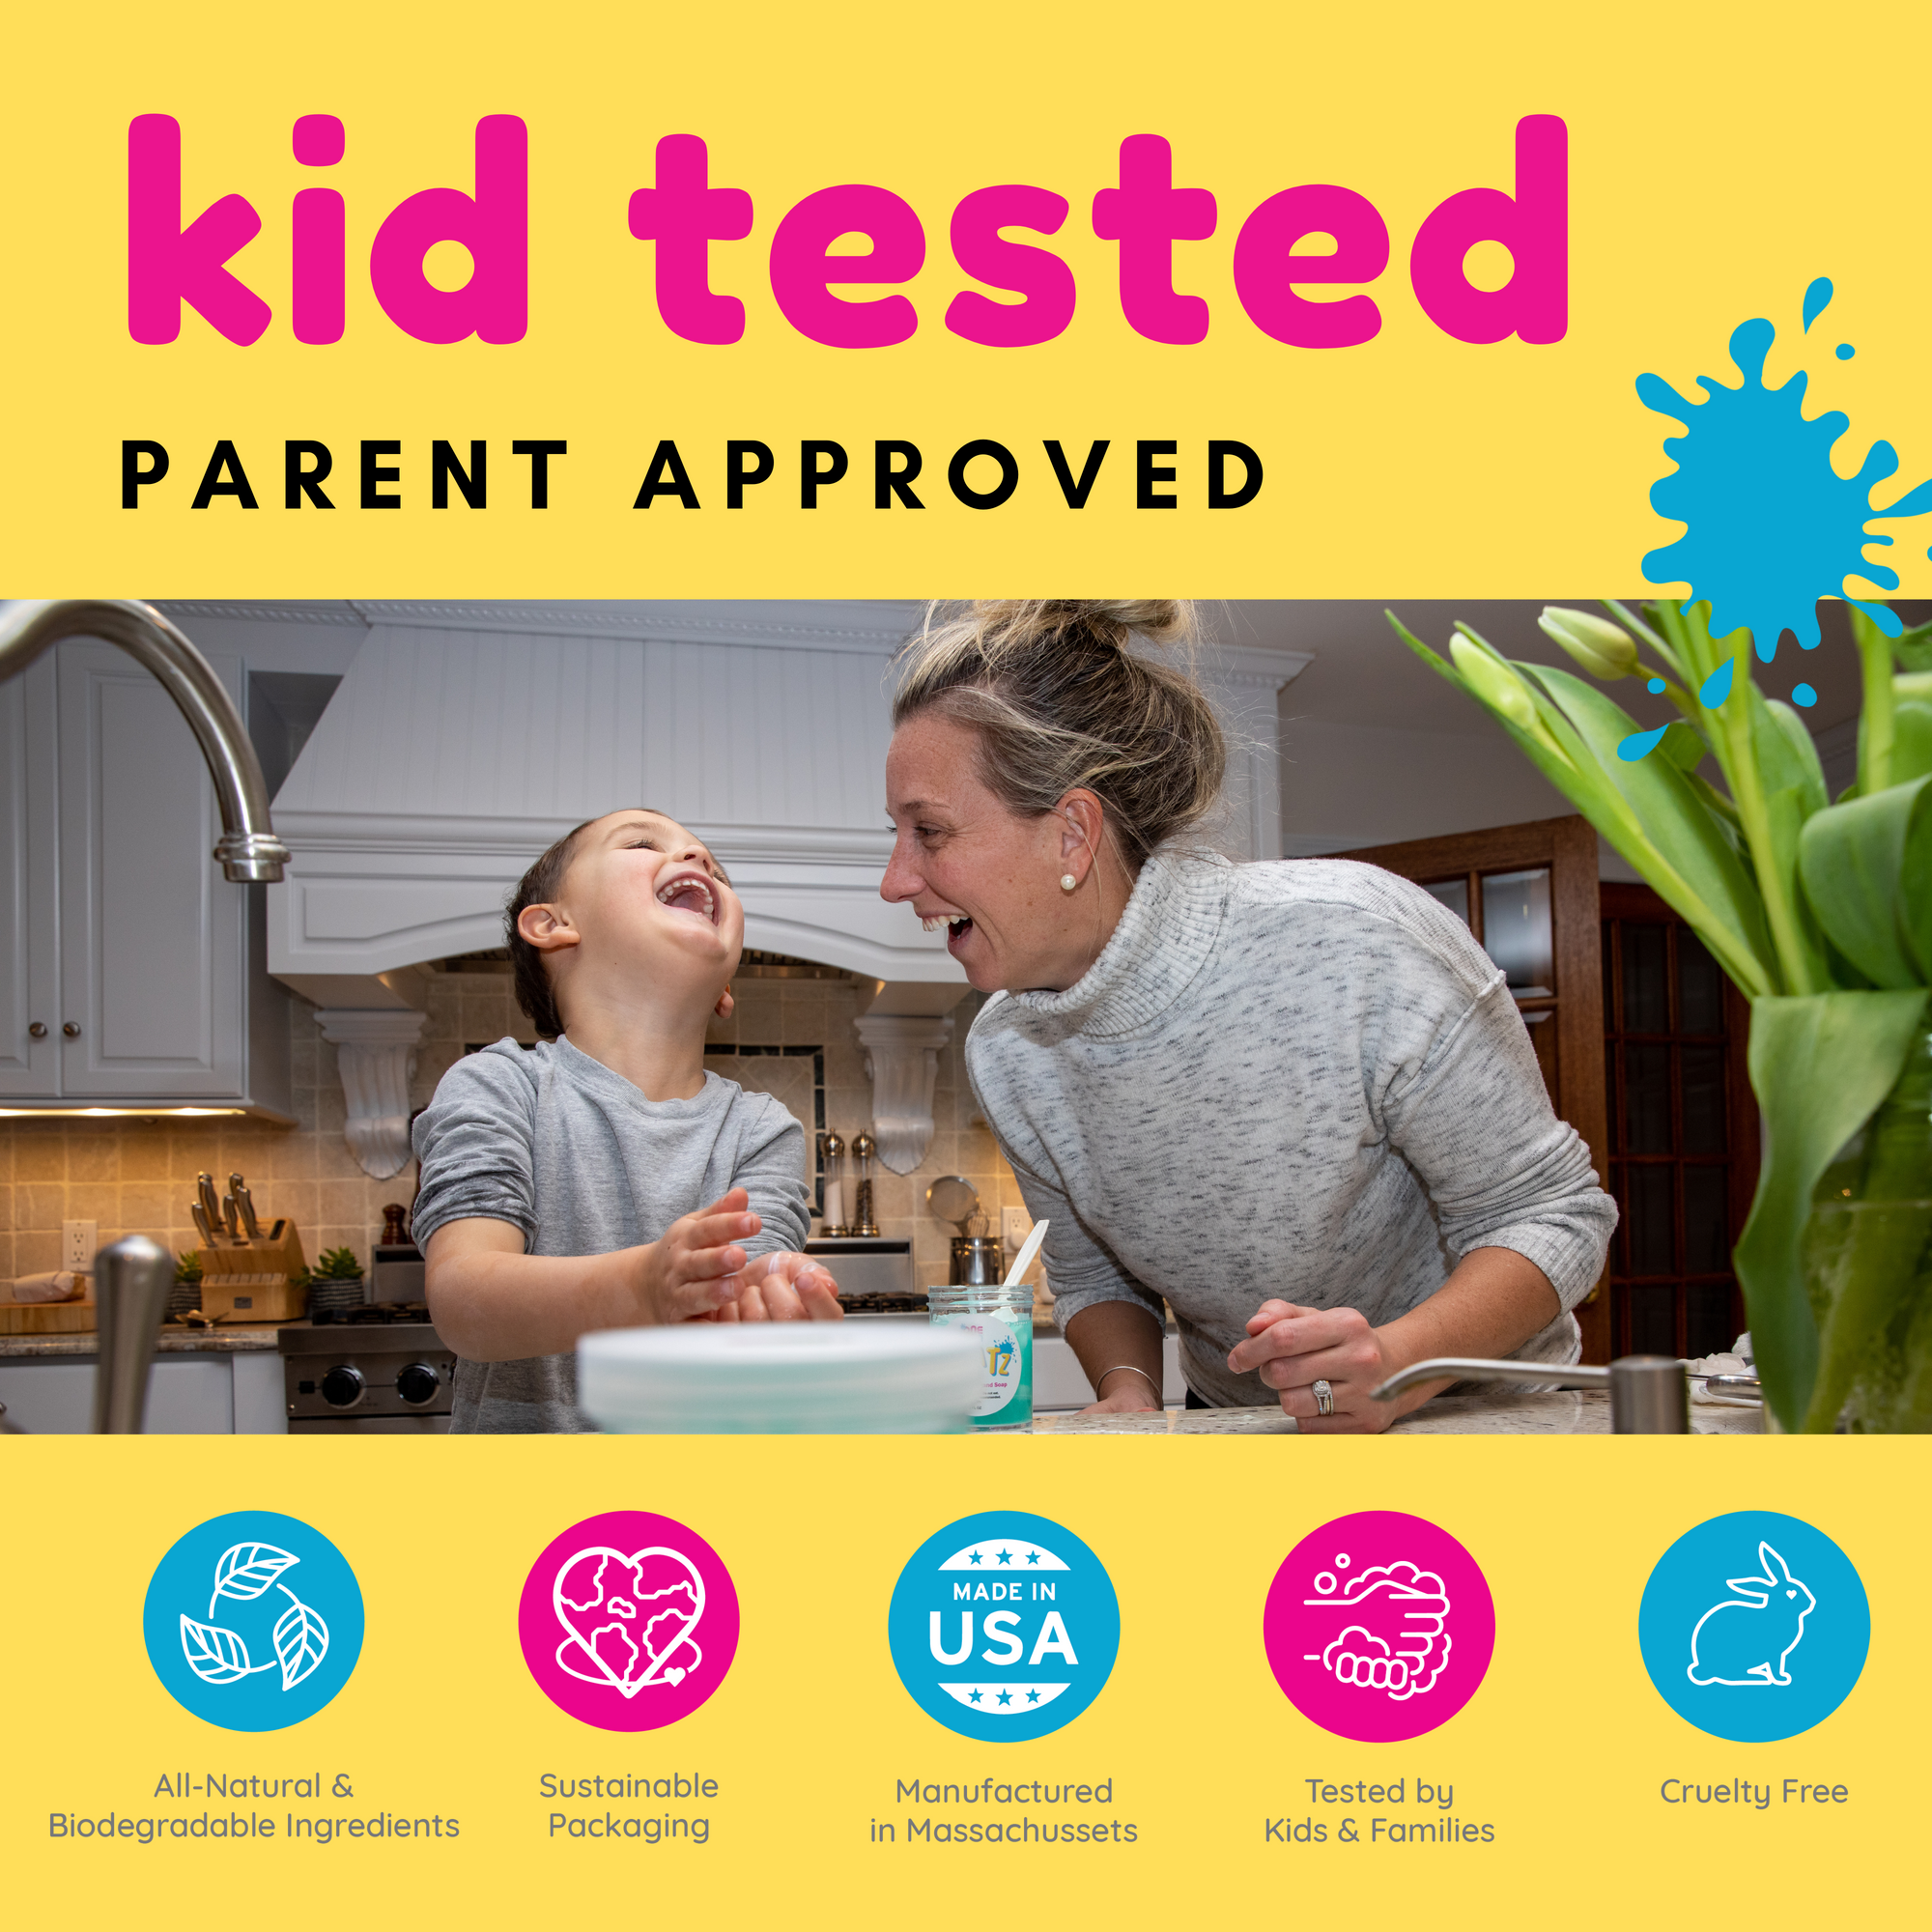 A picture captioned "kid tested, parent approved". Showing a mother and her child laughing in the kitchen while washing their hand over the sink